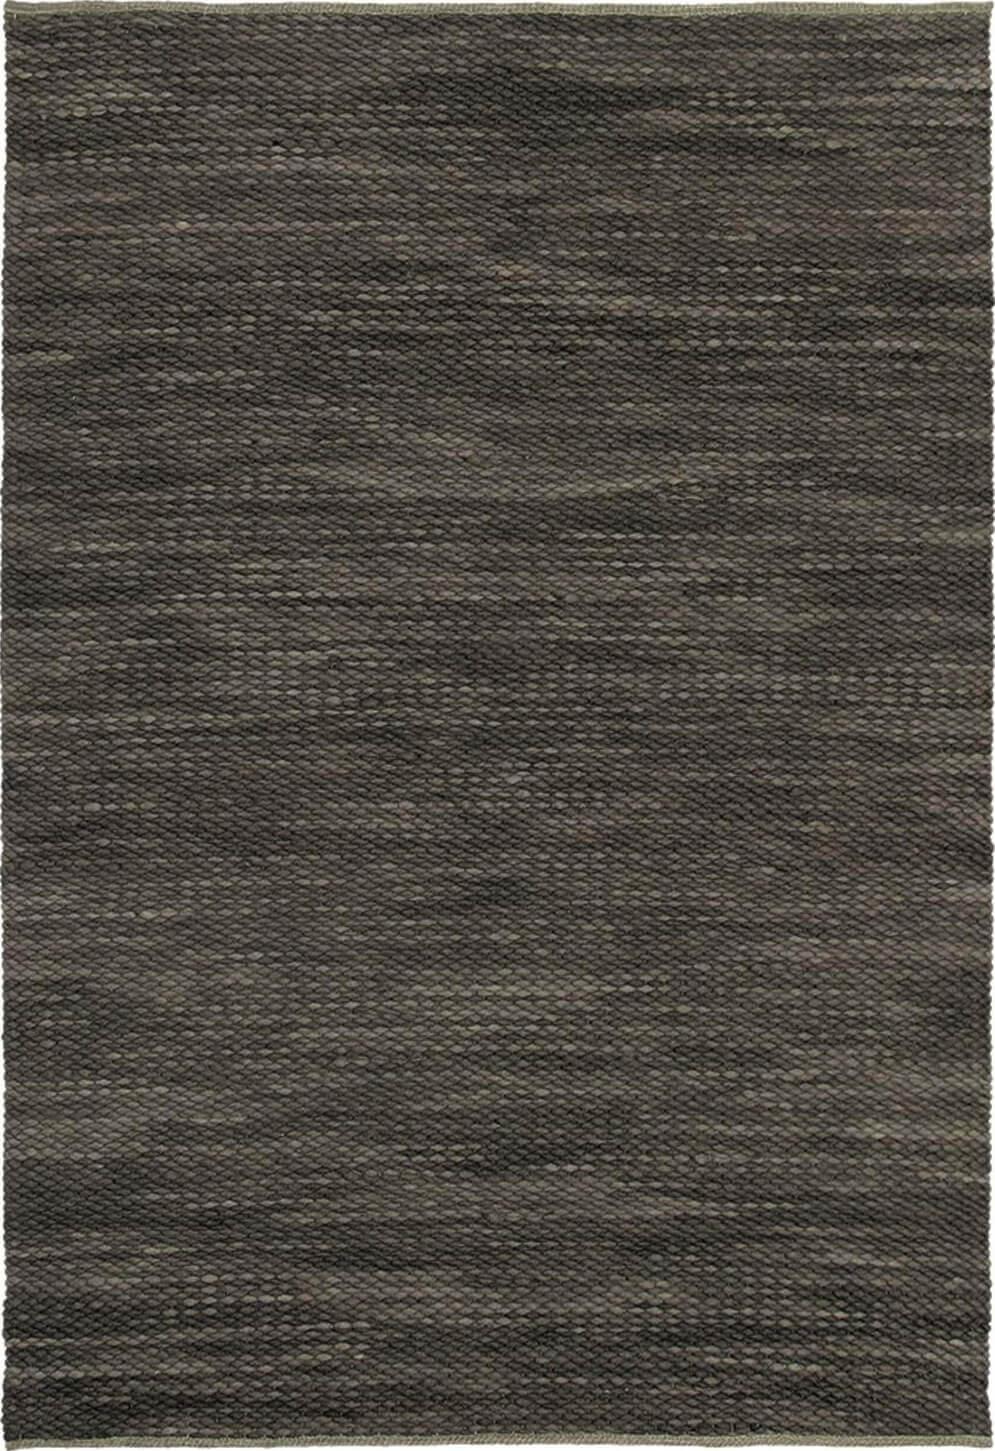 Pinto 29605 Rug by Brink & Campman ☞ Size: 200 x 280 cm